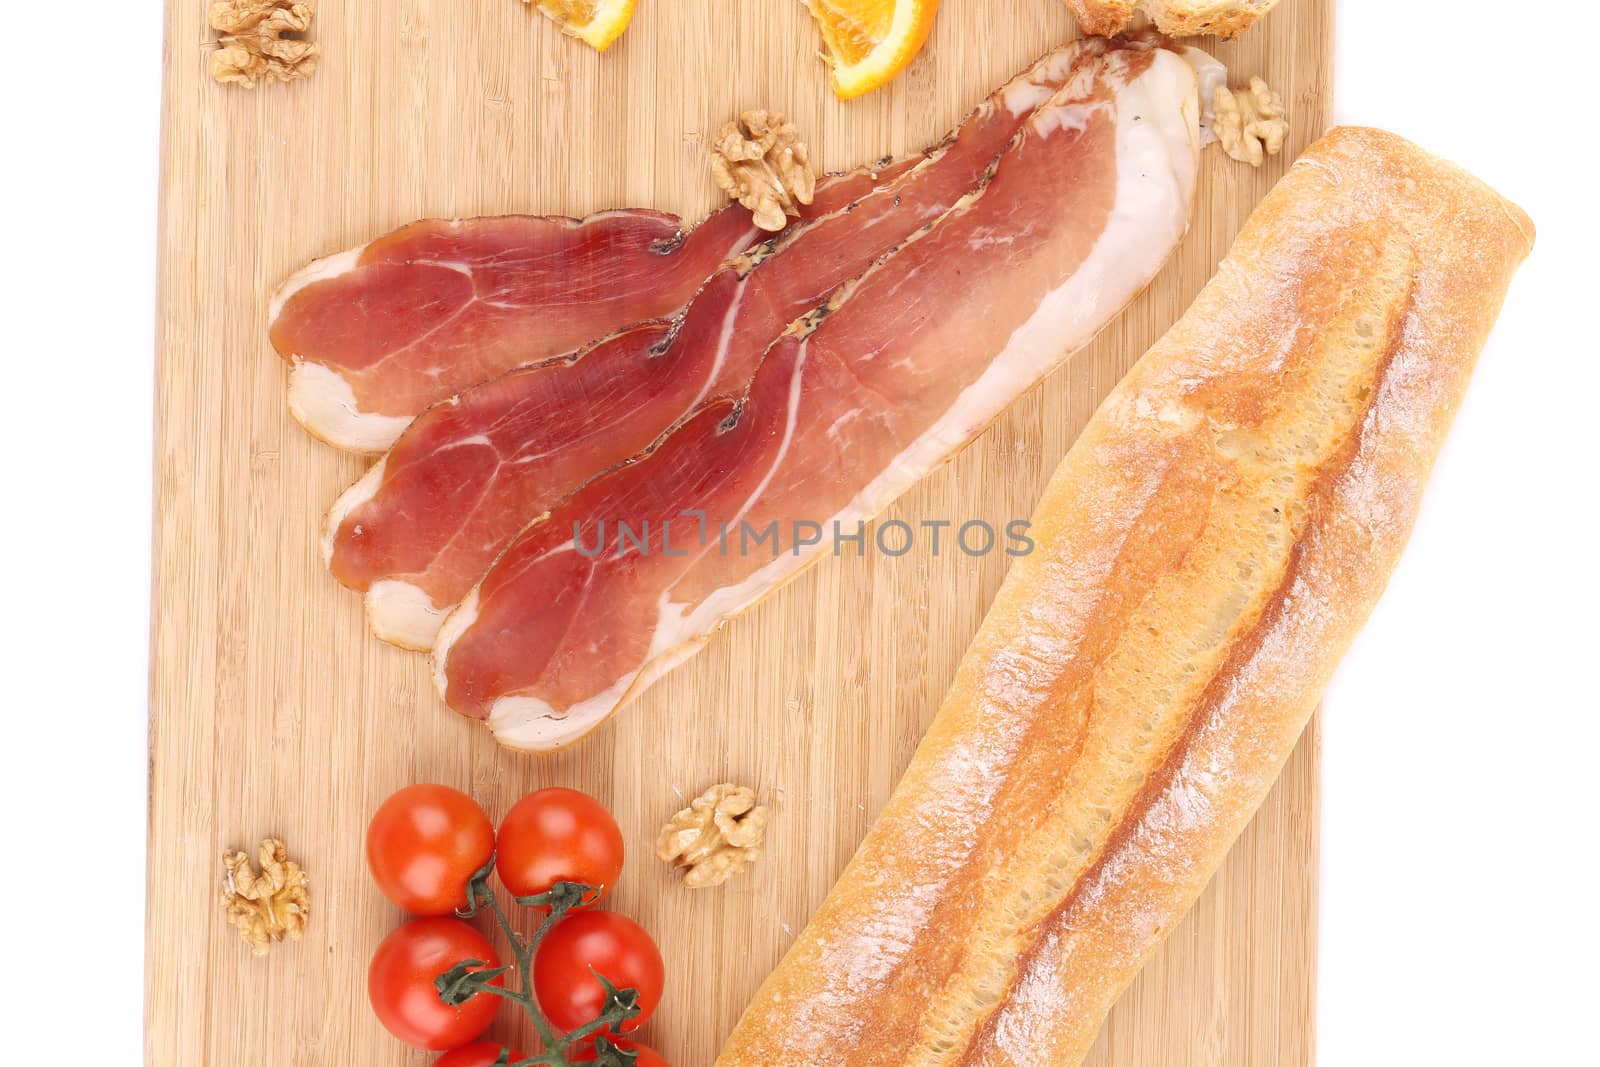 Prosciutto with cherry tomatoes and walnuts. Whole background.